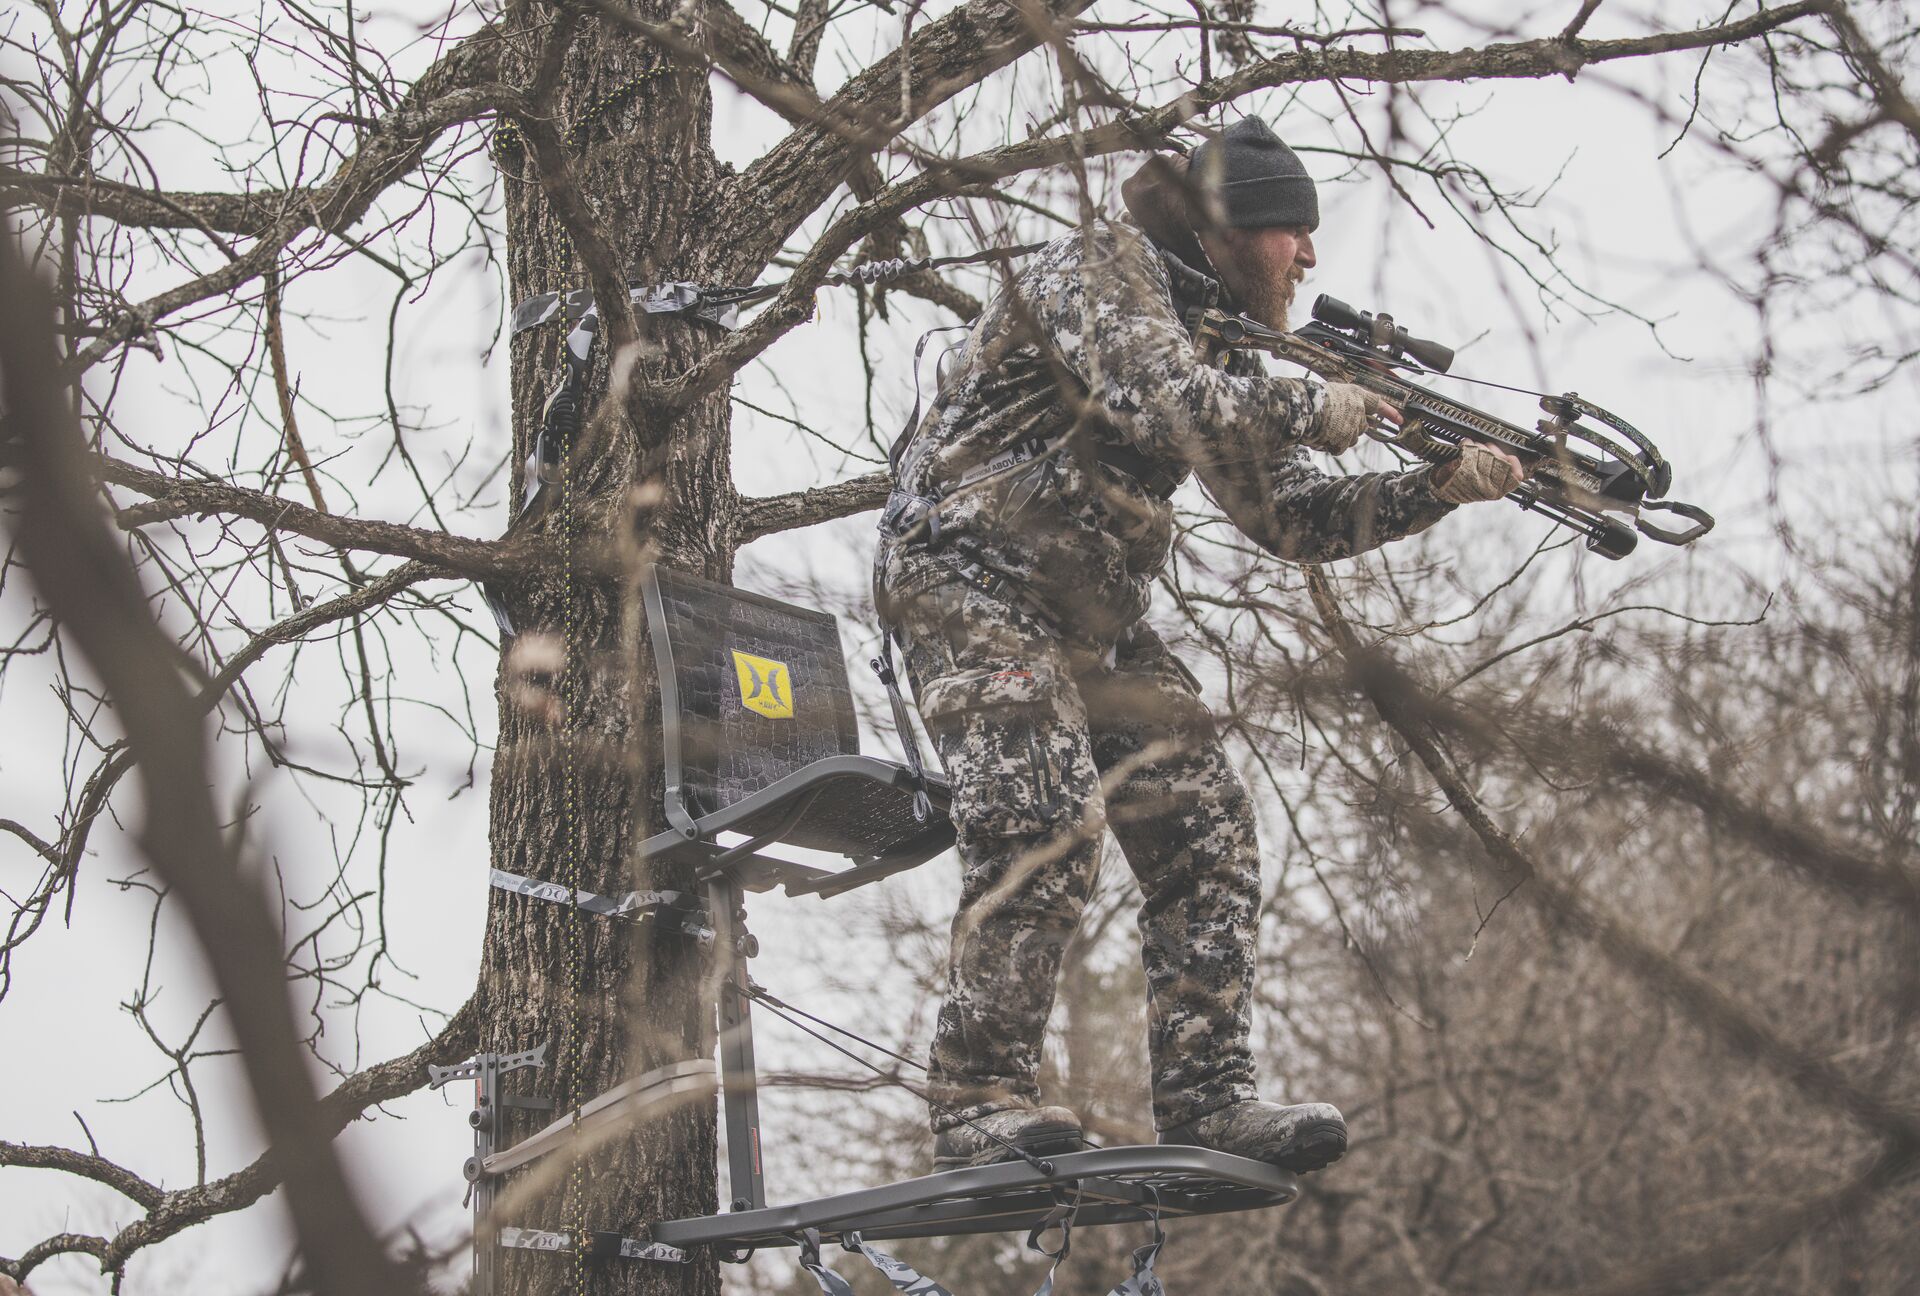 A hunter using a crossbow from a tree stand